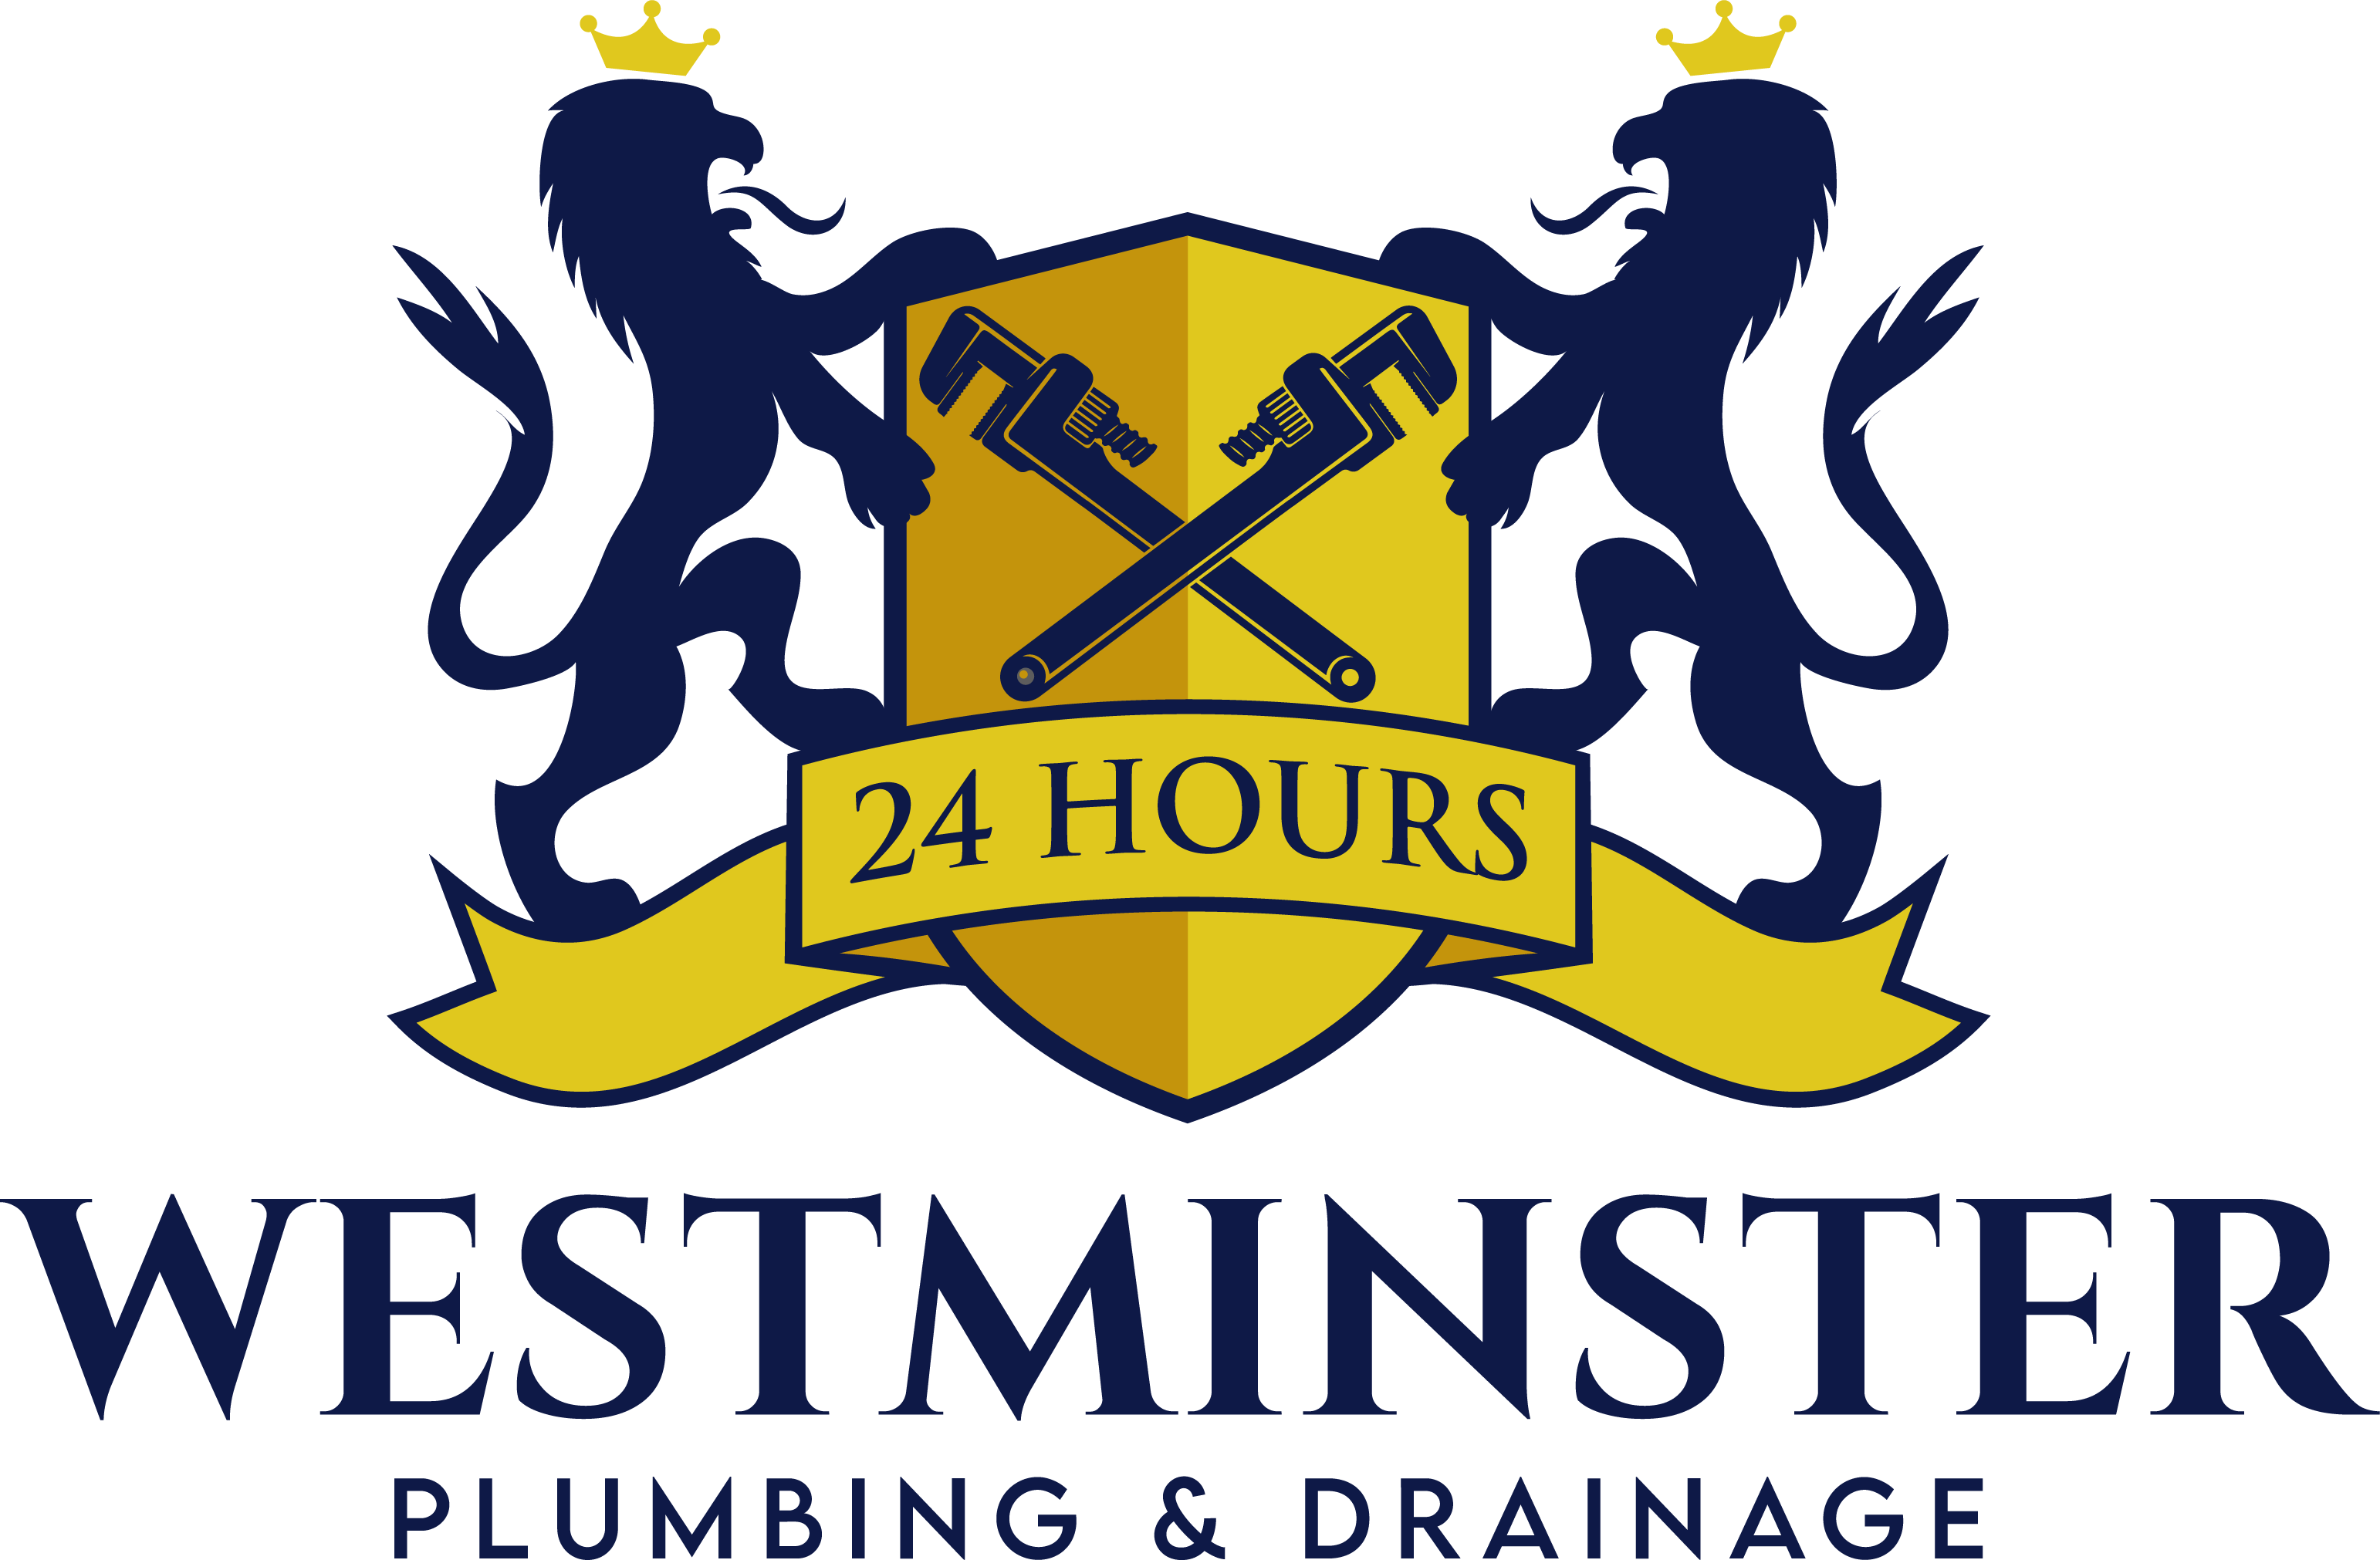 cropped Westminster Plumbing Drainage logo 20231